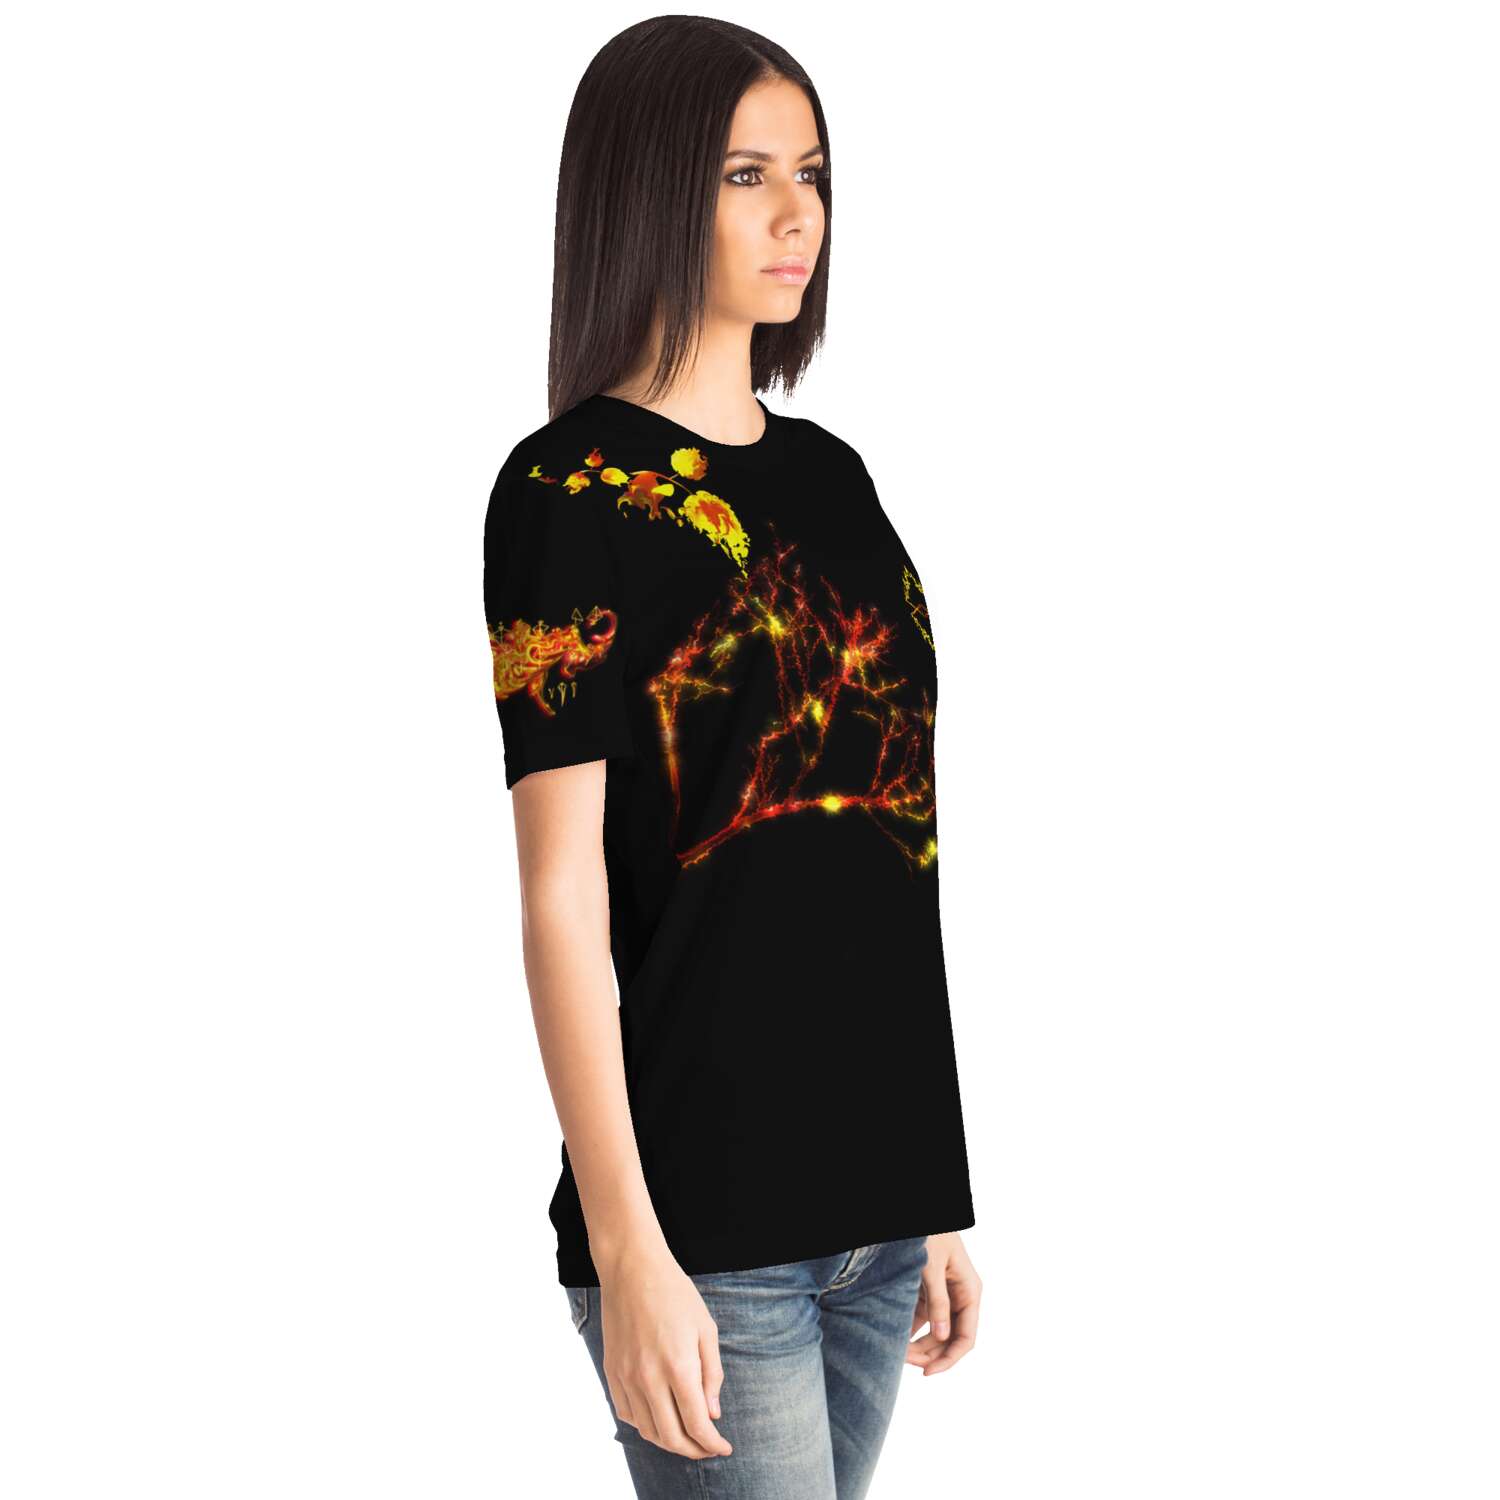 Taiga-Zoku  (Prototype Line) "Amber Forest Midnight" T Shirt - Who R We Collective